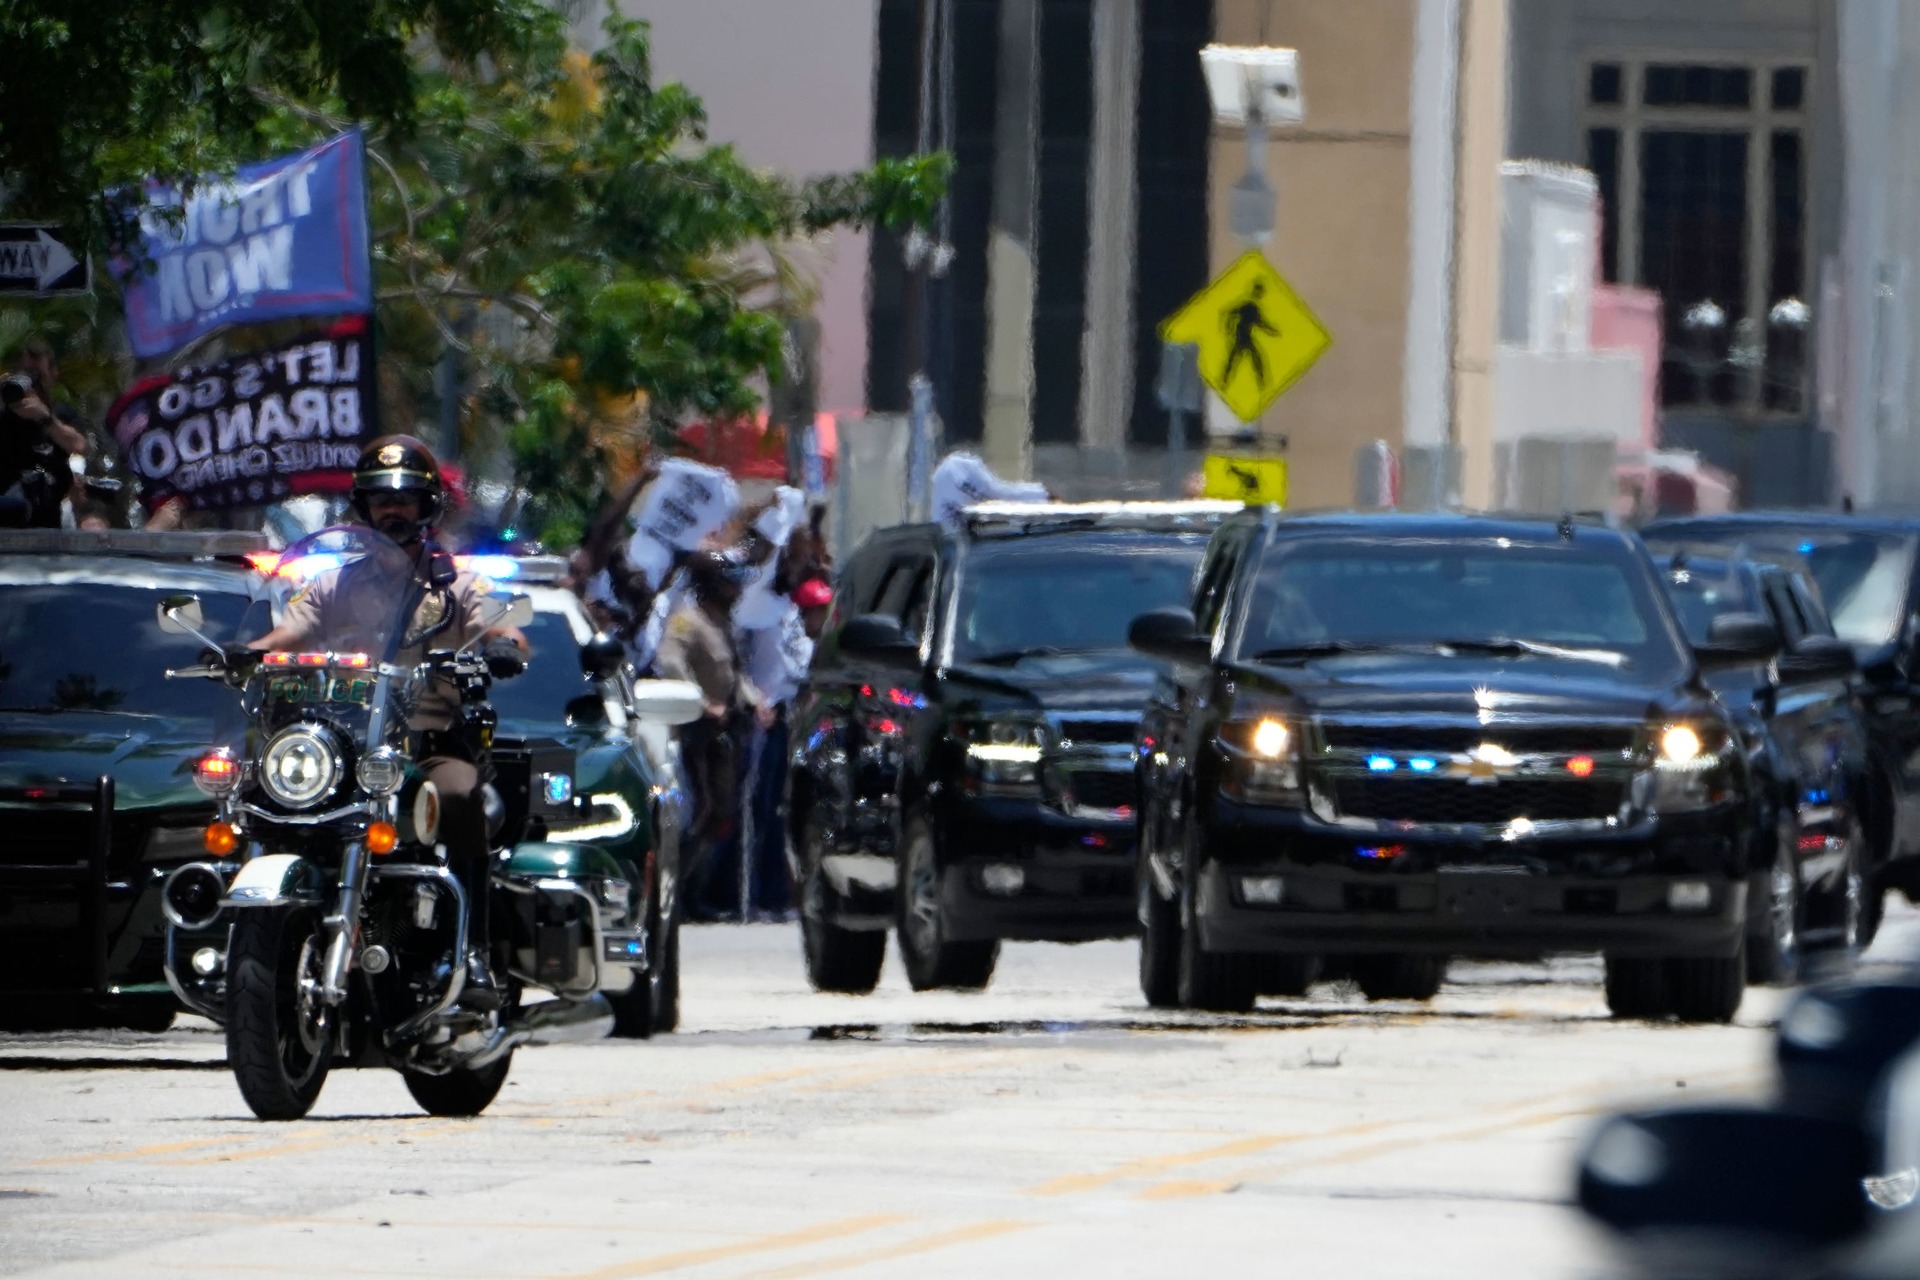 The motorcade carrying former president Donald Trump arrives near the Wilkie D Ferguson Jr Courthouse in Miami.